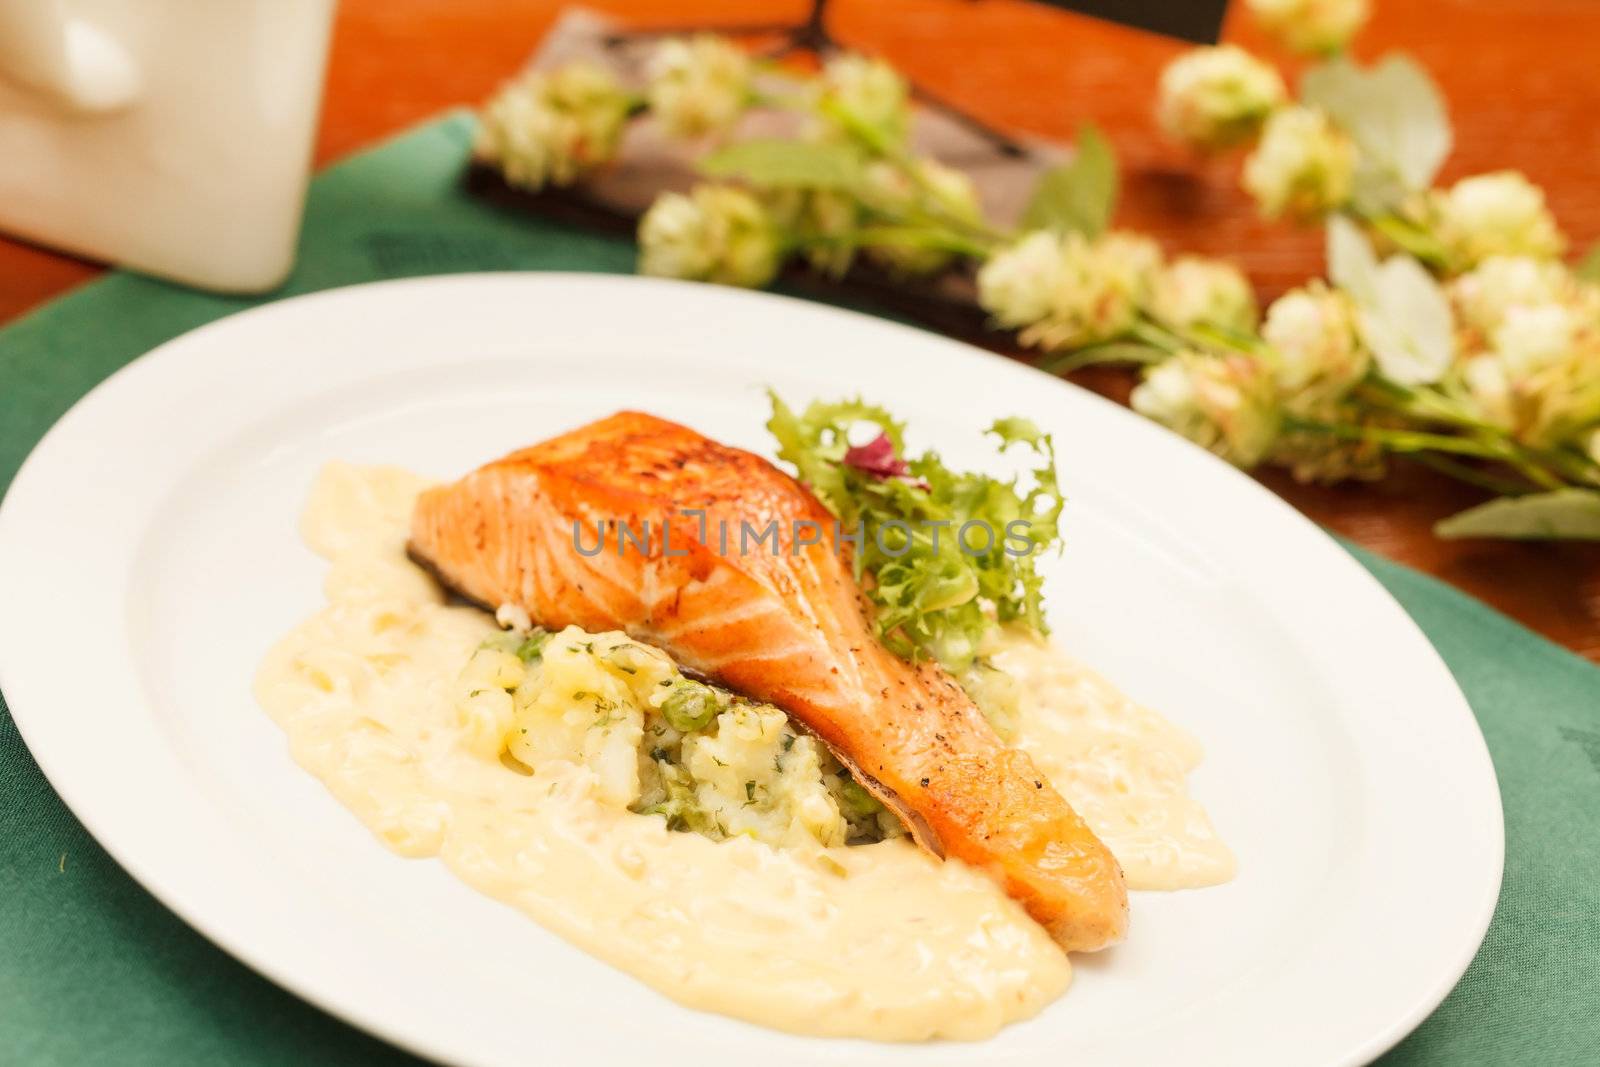 Salmon Steak with Vegetables by shebeko